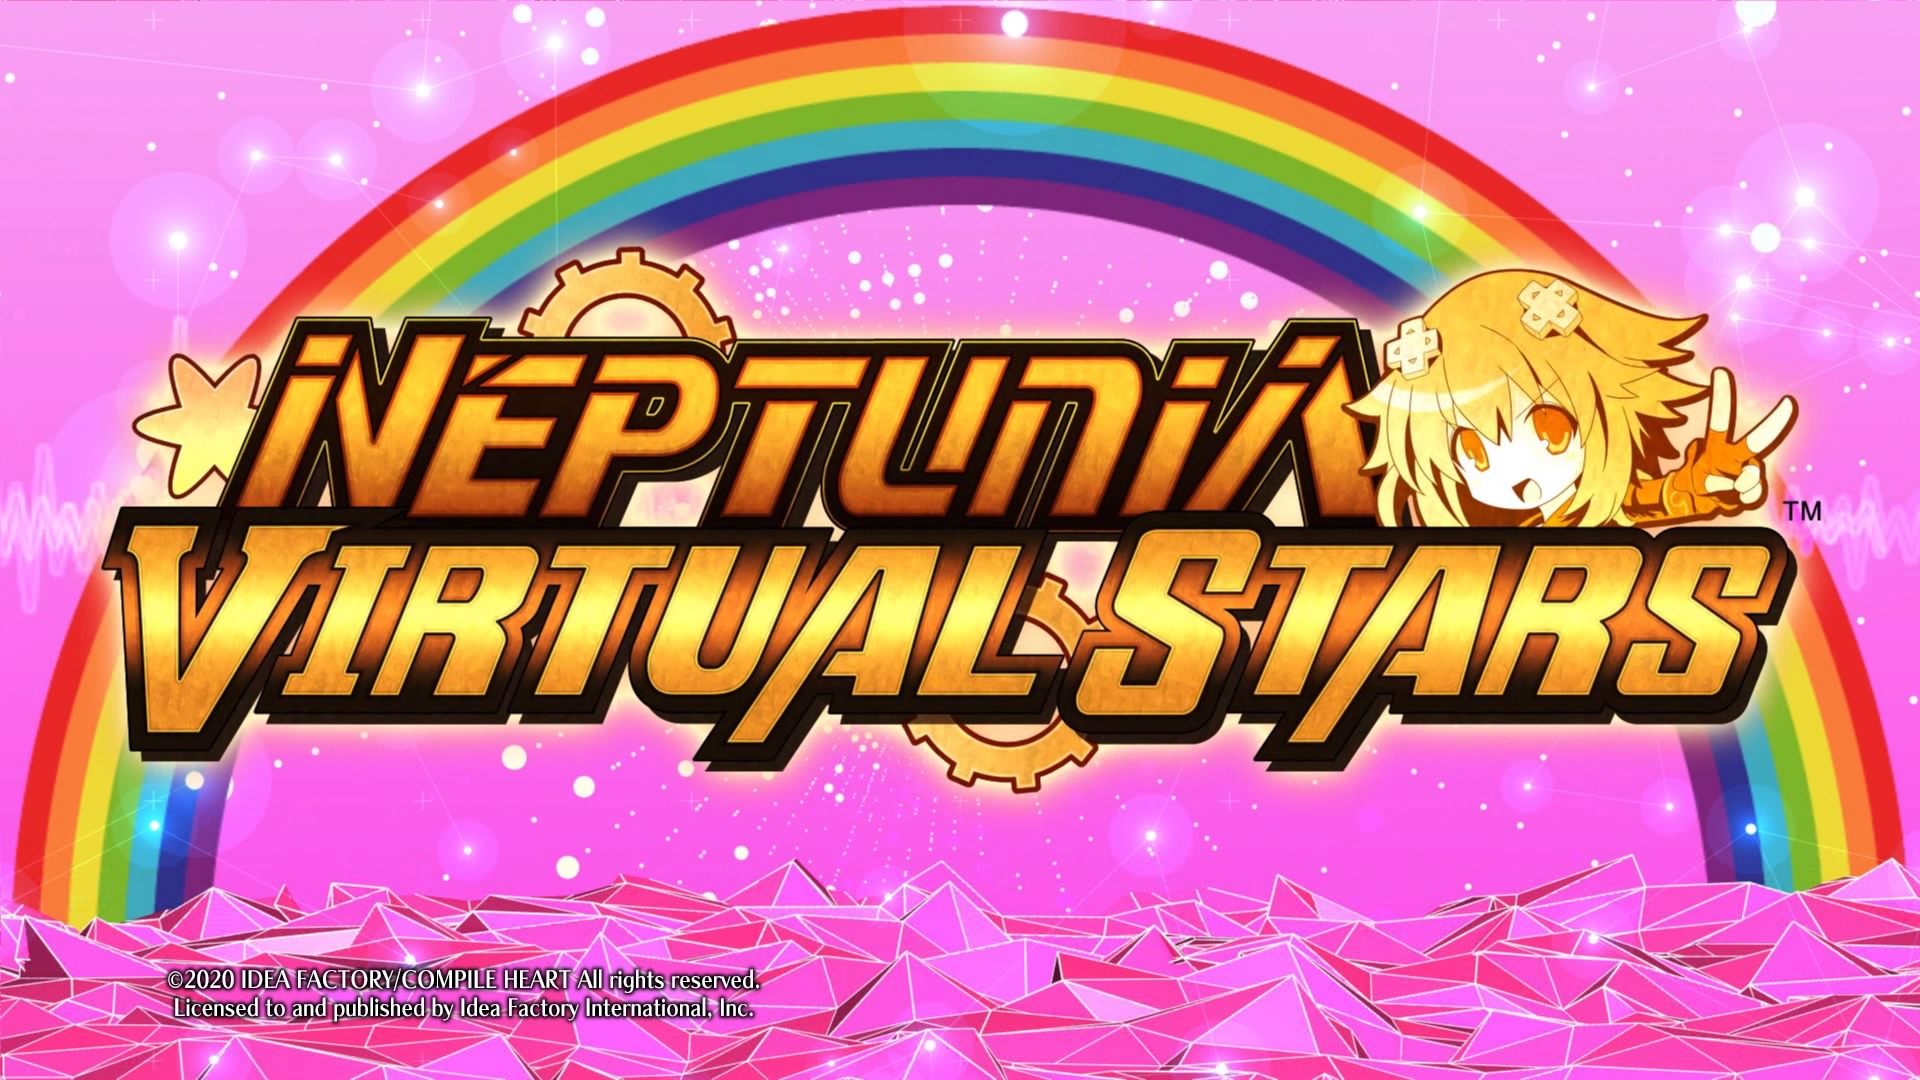 neptunia_virtual_stars_splash Neptunia Virtual Stars (VVVTune) Is a Disappointing Game That Only Appeals to Hardcore Neptunia Fans, If at All